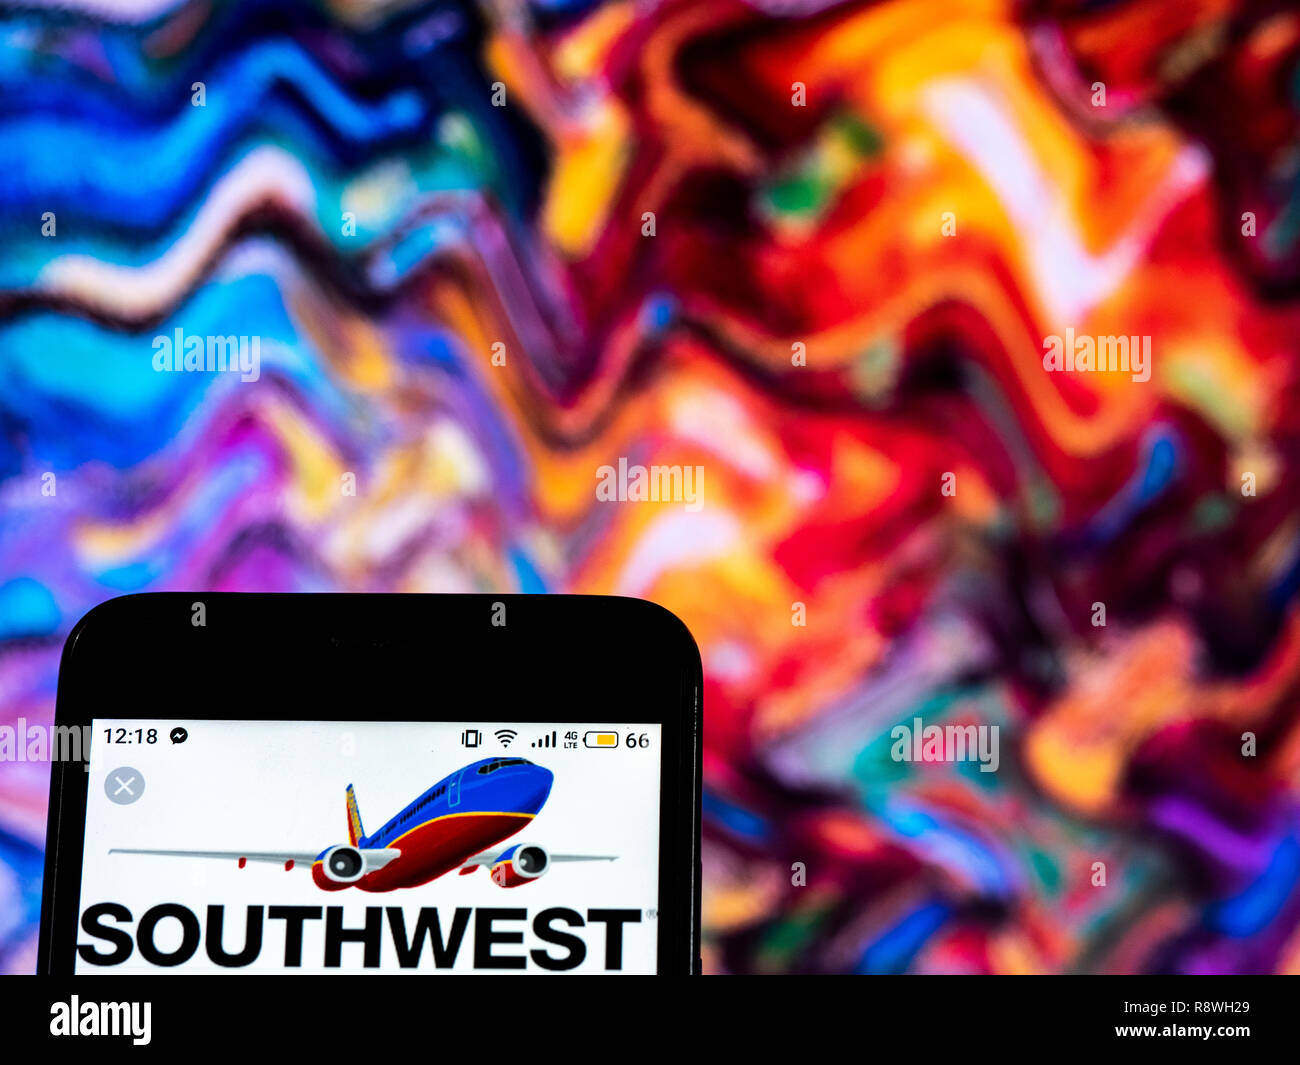 Southwest Airlines logo seen displayed on smart phone Stock Photo